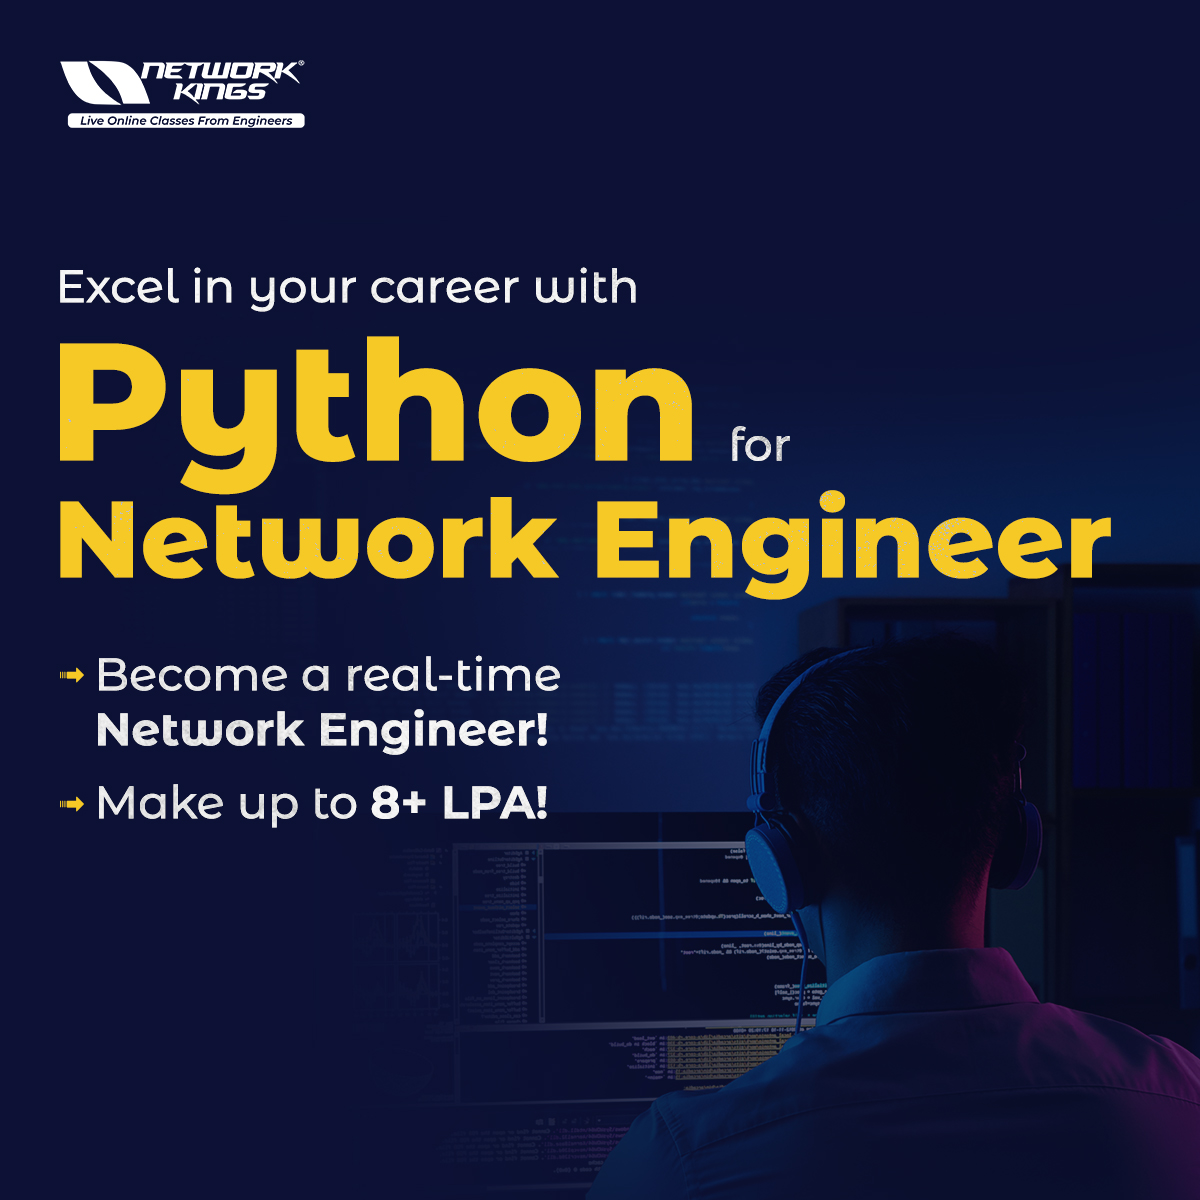 python for networking engineers course